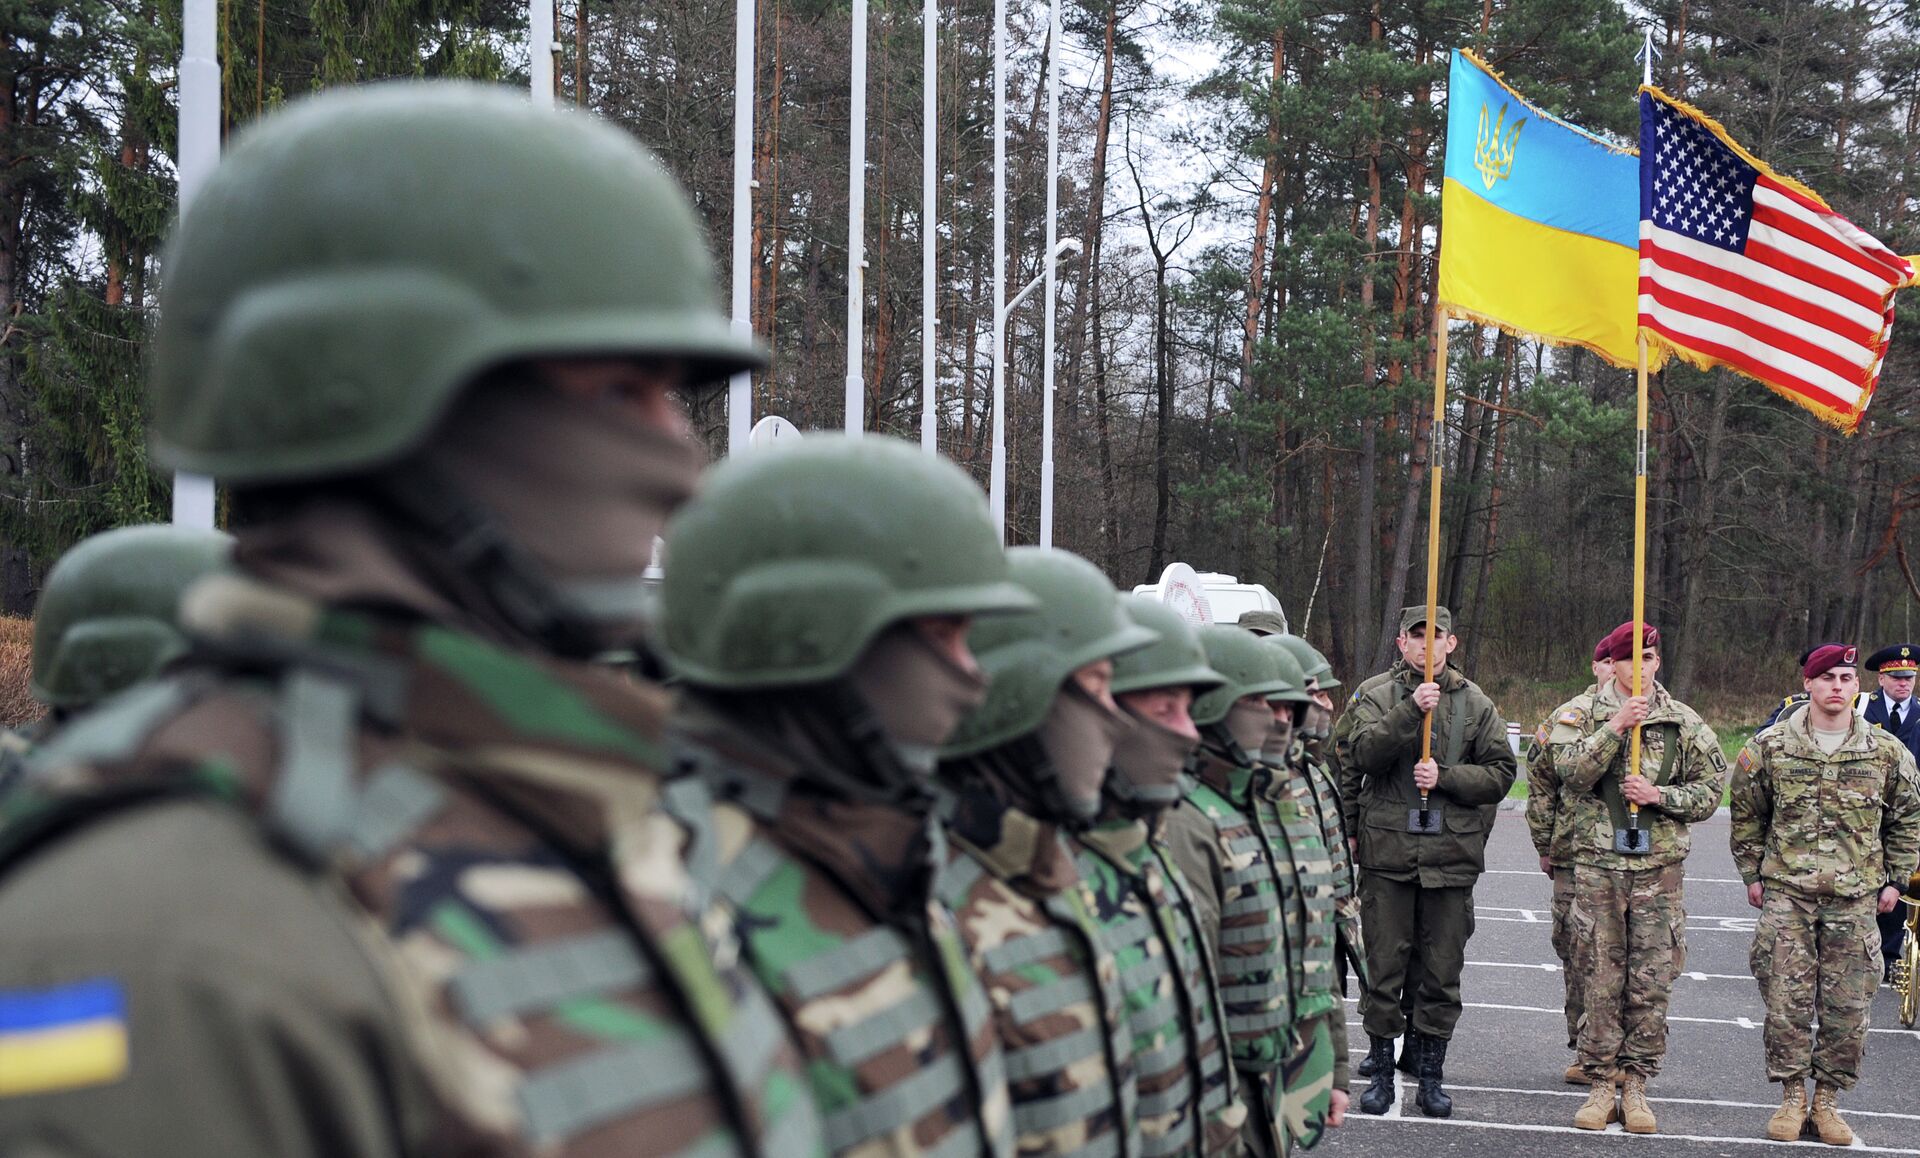 US and Ukrainian soldiers attend an opening ceremony of the joint Ukrainian-US military exercise Fearless Guardian at the Yavoriv training ground. - Sputnik International, 1920, 31.01.2022